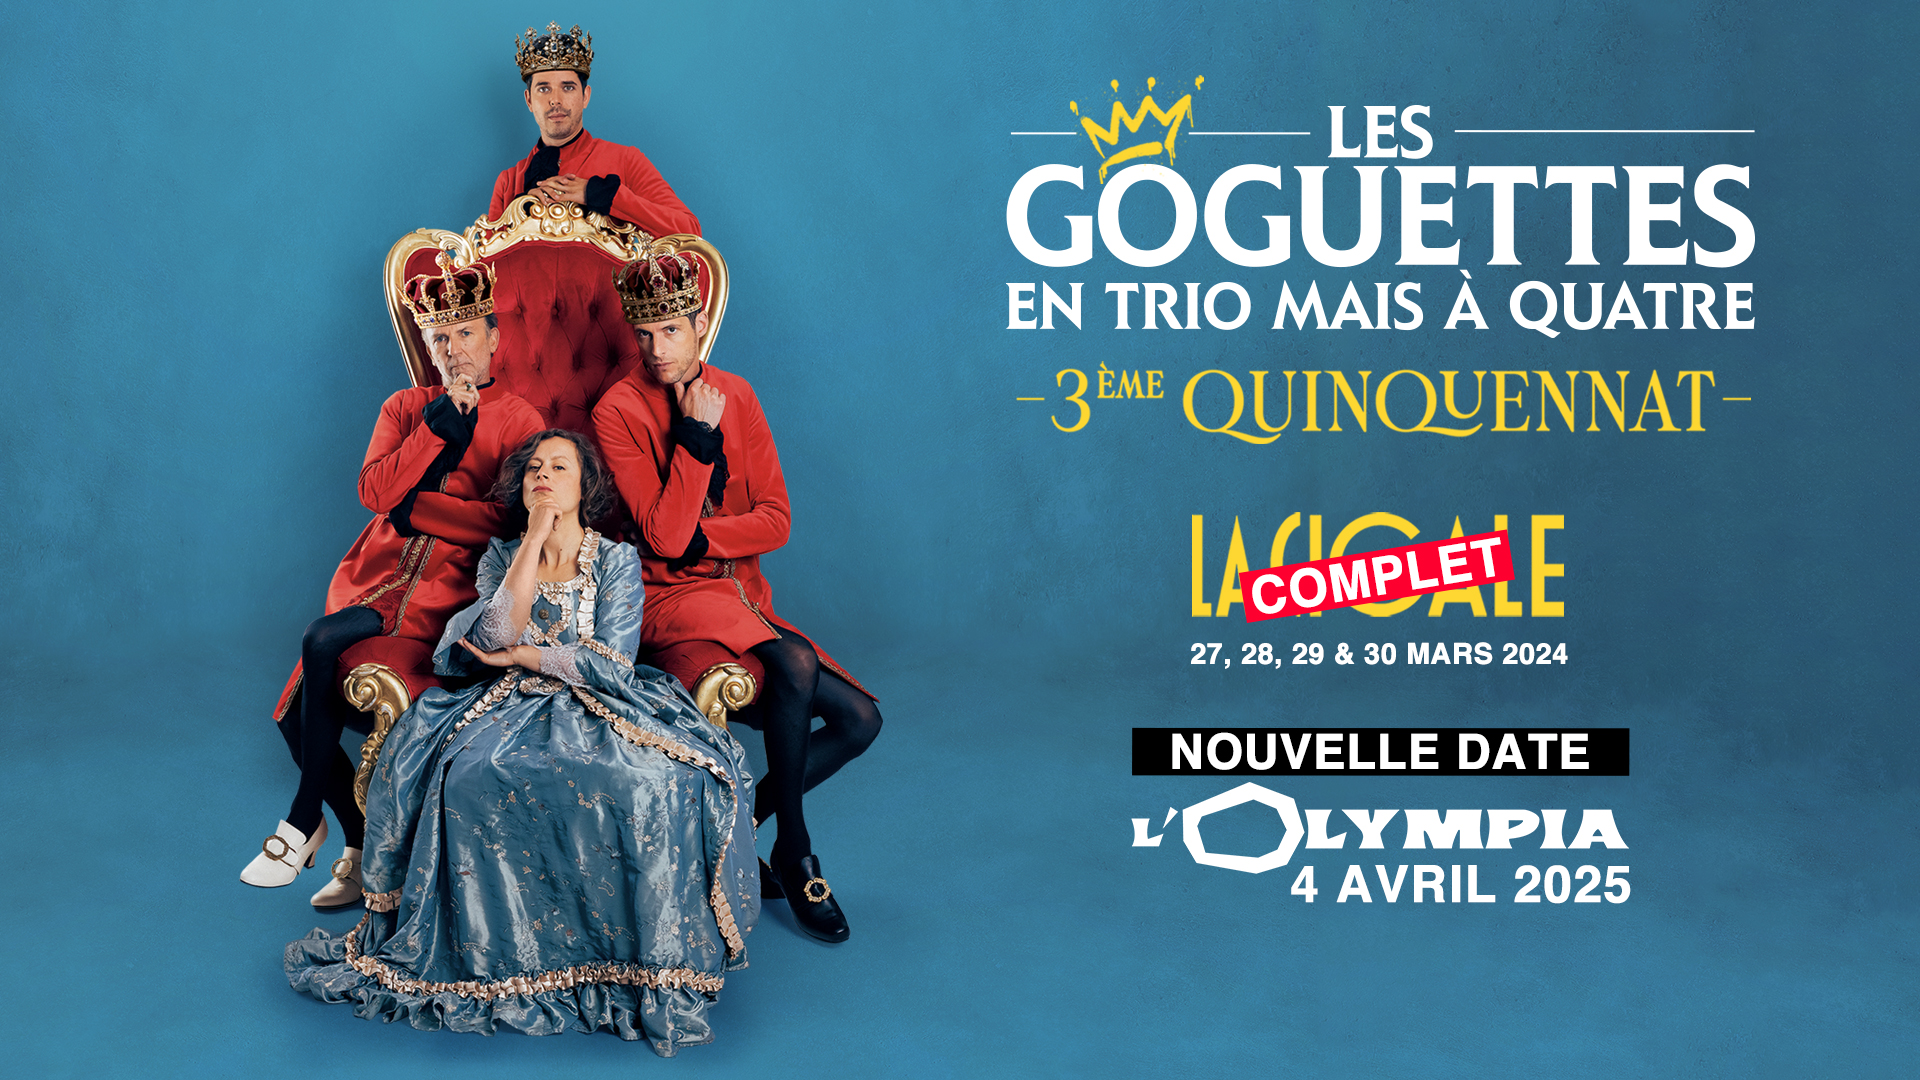 Les Goguettes in der Olympia Tickets